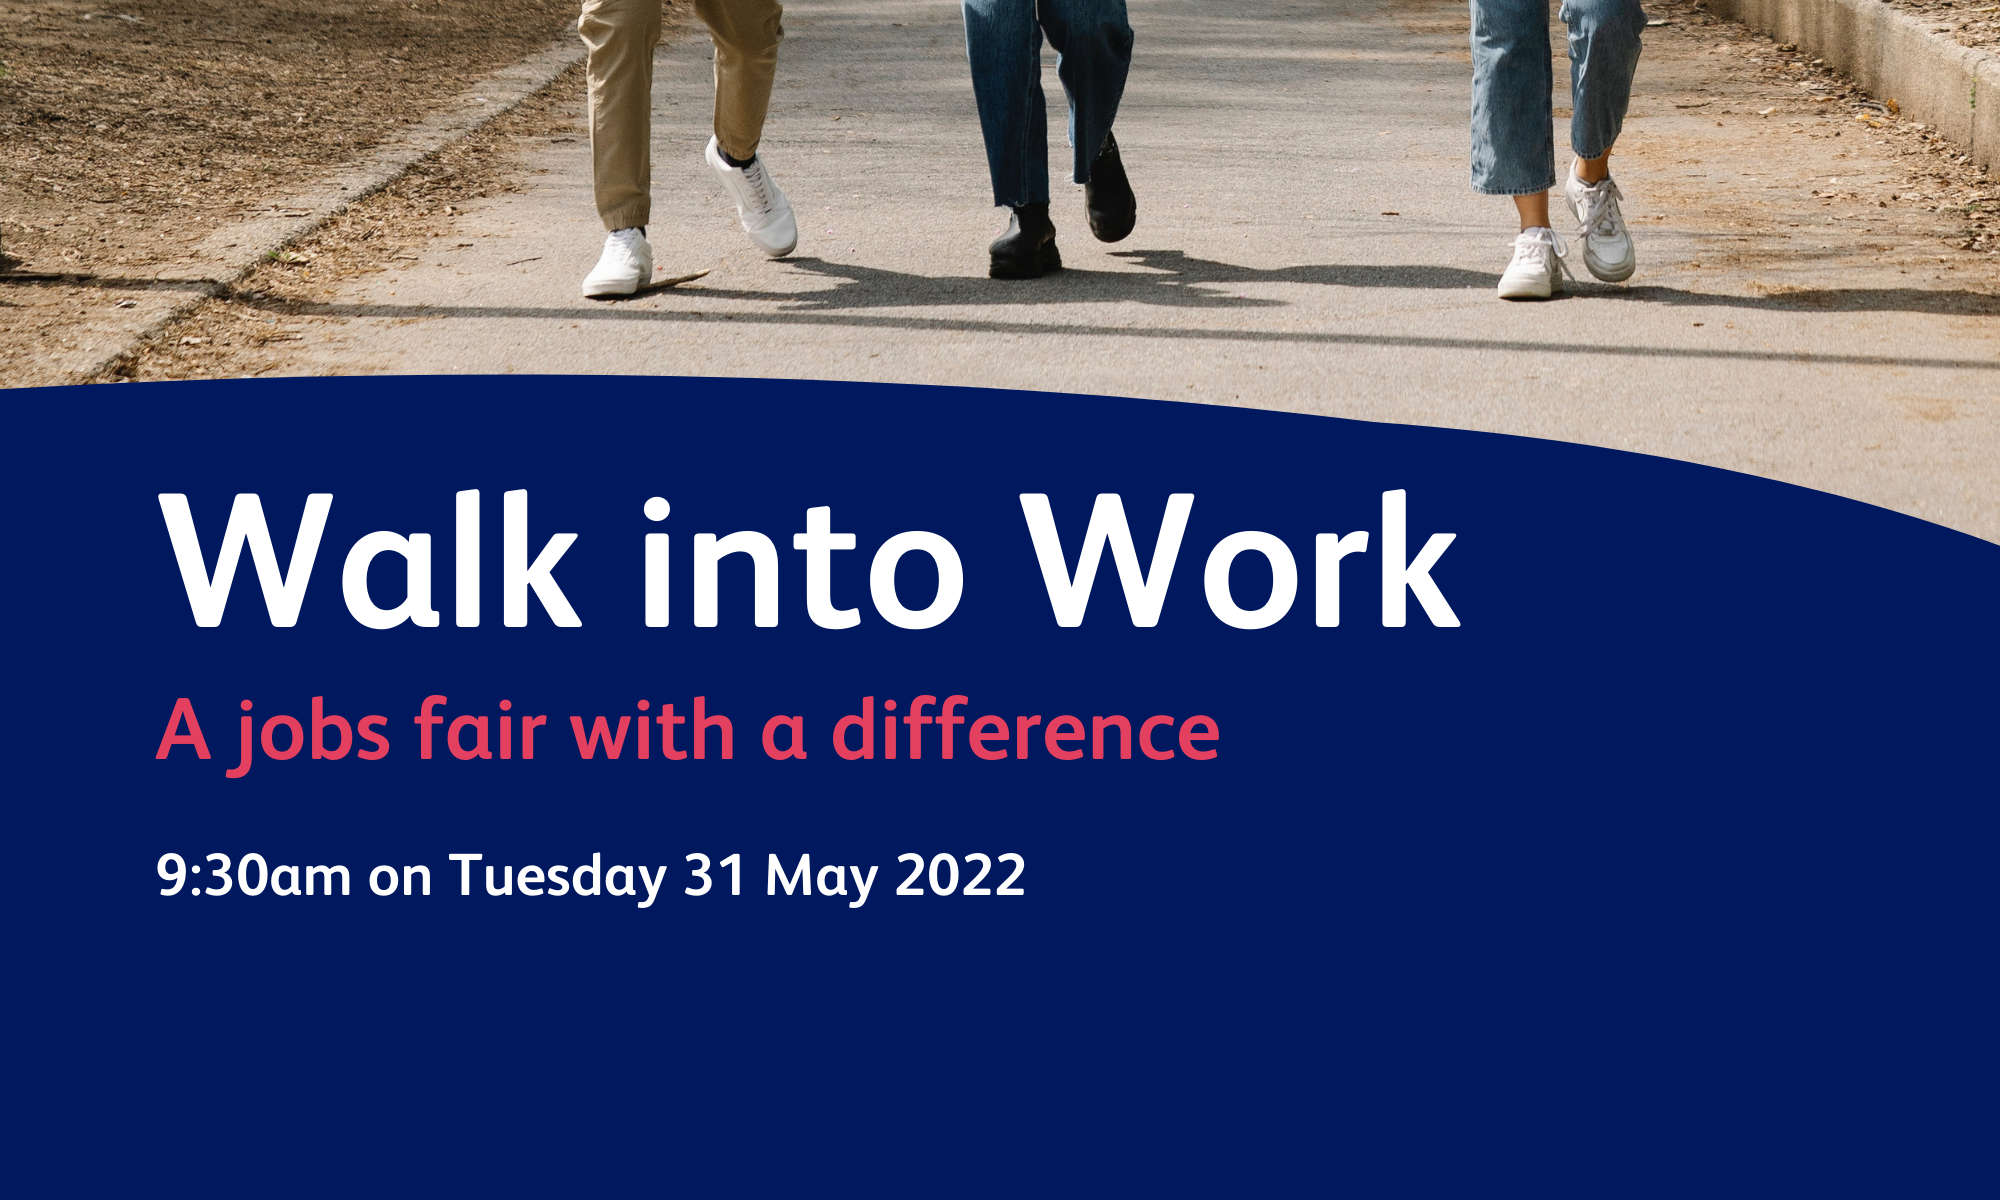 Walk into Work - A jobs fair with a difference